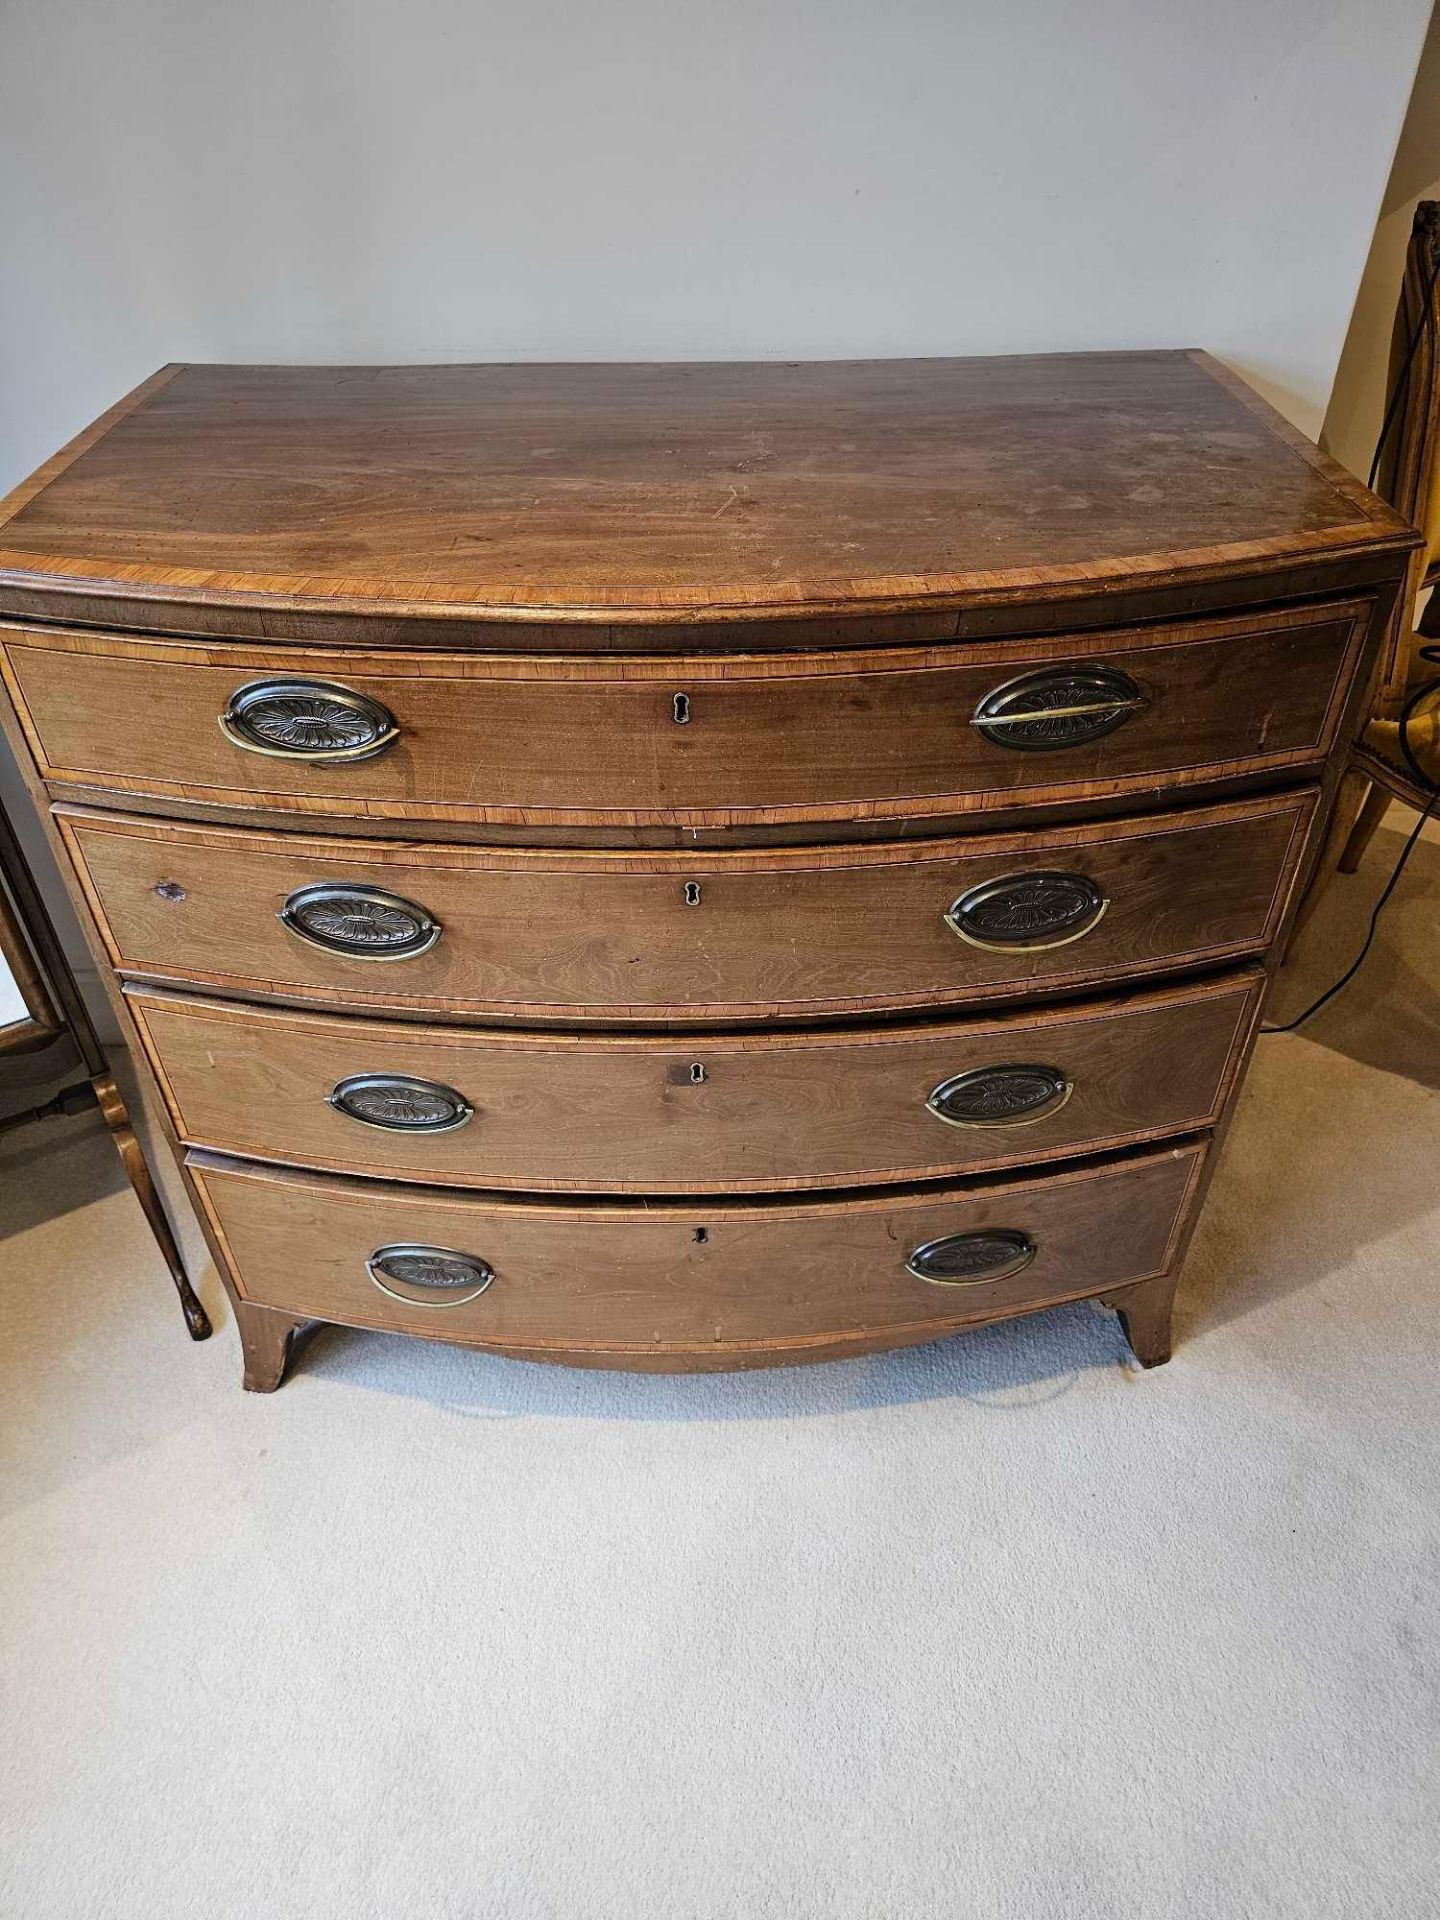 A George III Mahogany And Satinwood Banded Bowfront Chest With Four Graduating Drawers On Splayed - Image 7 of 7